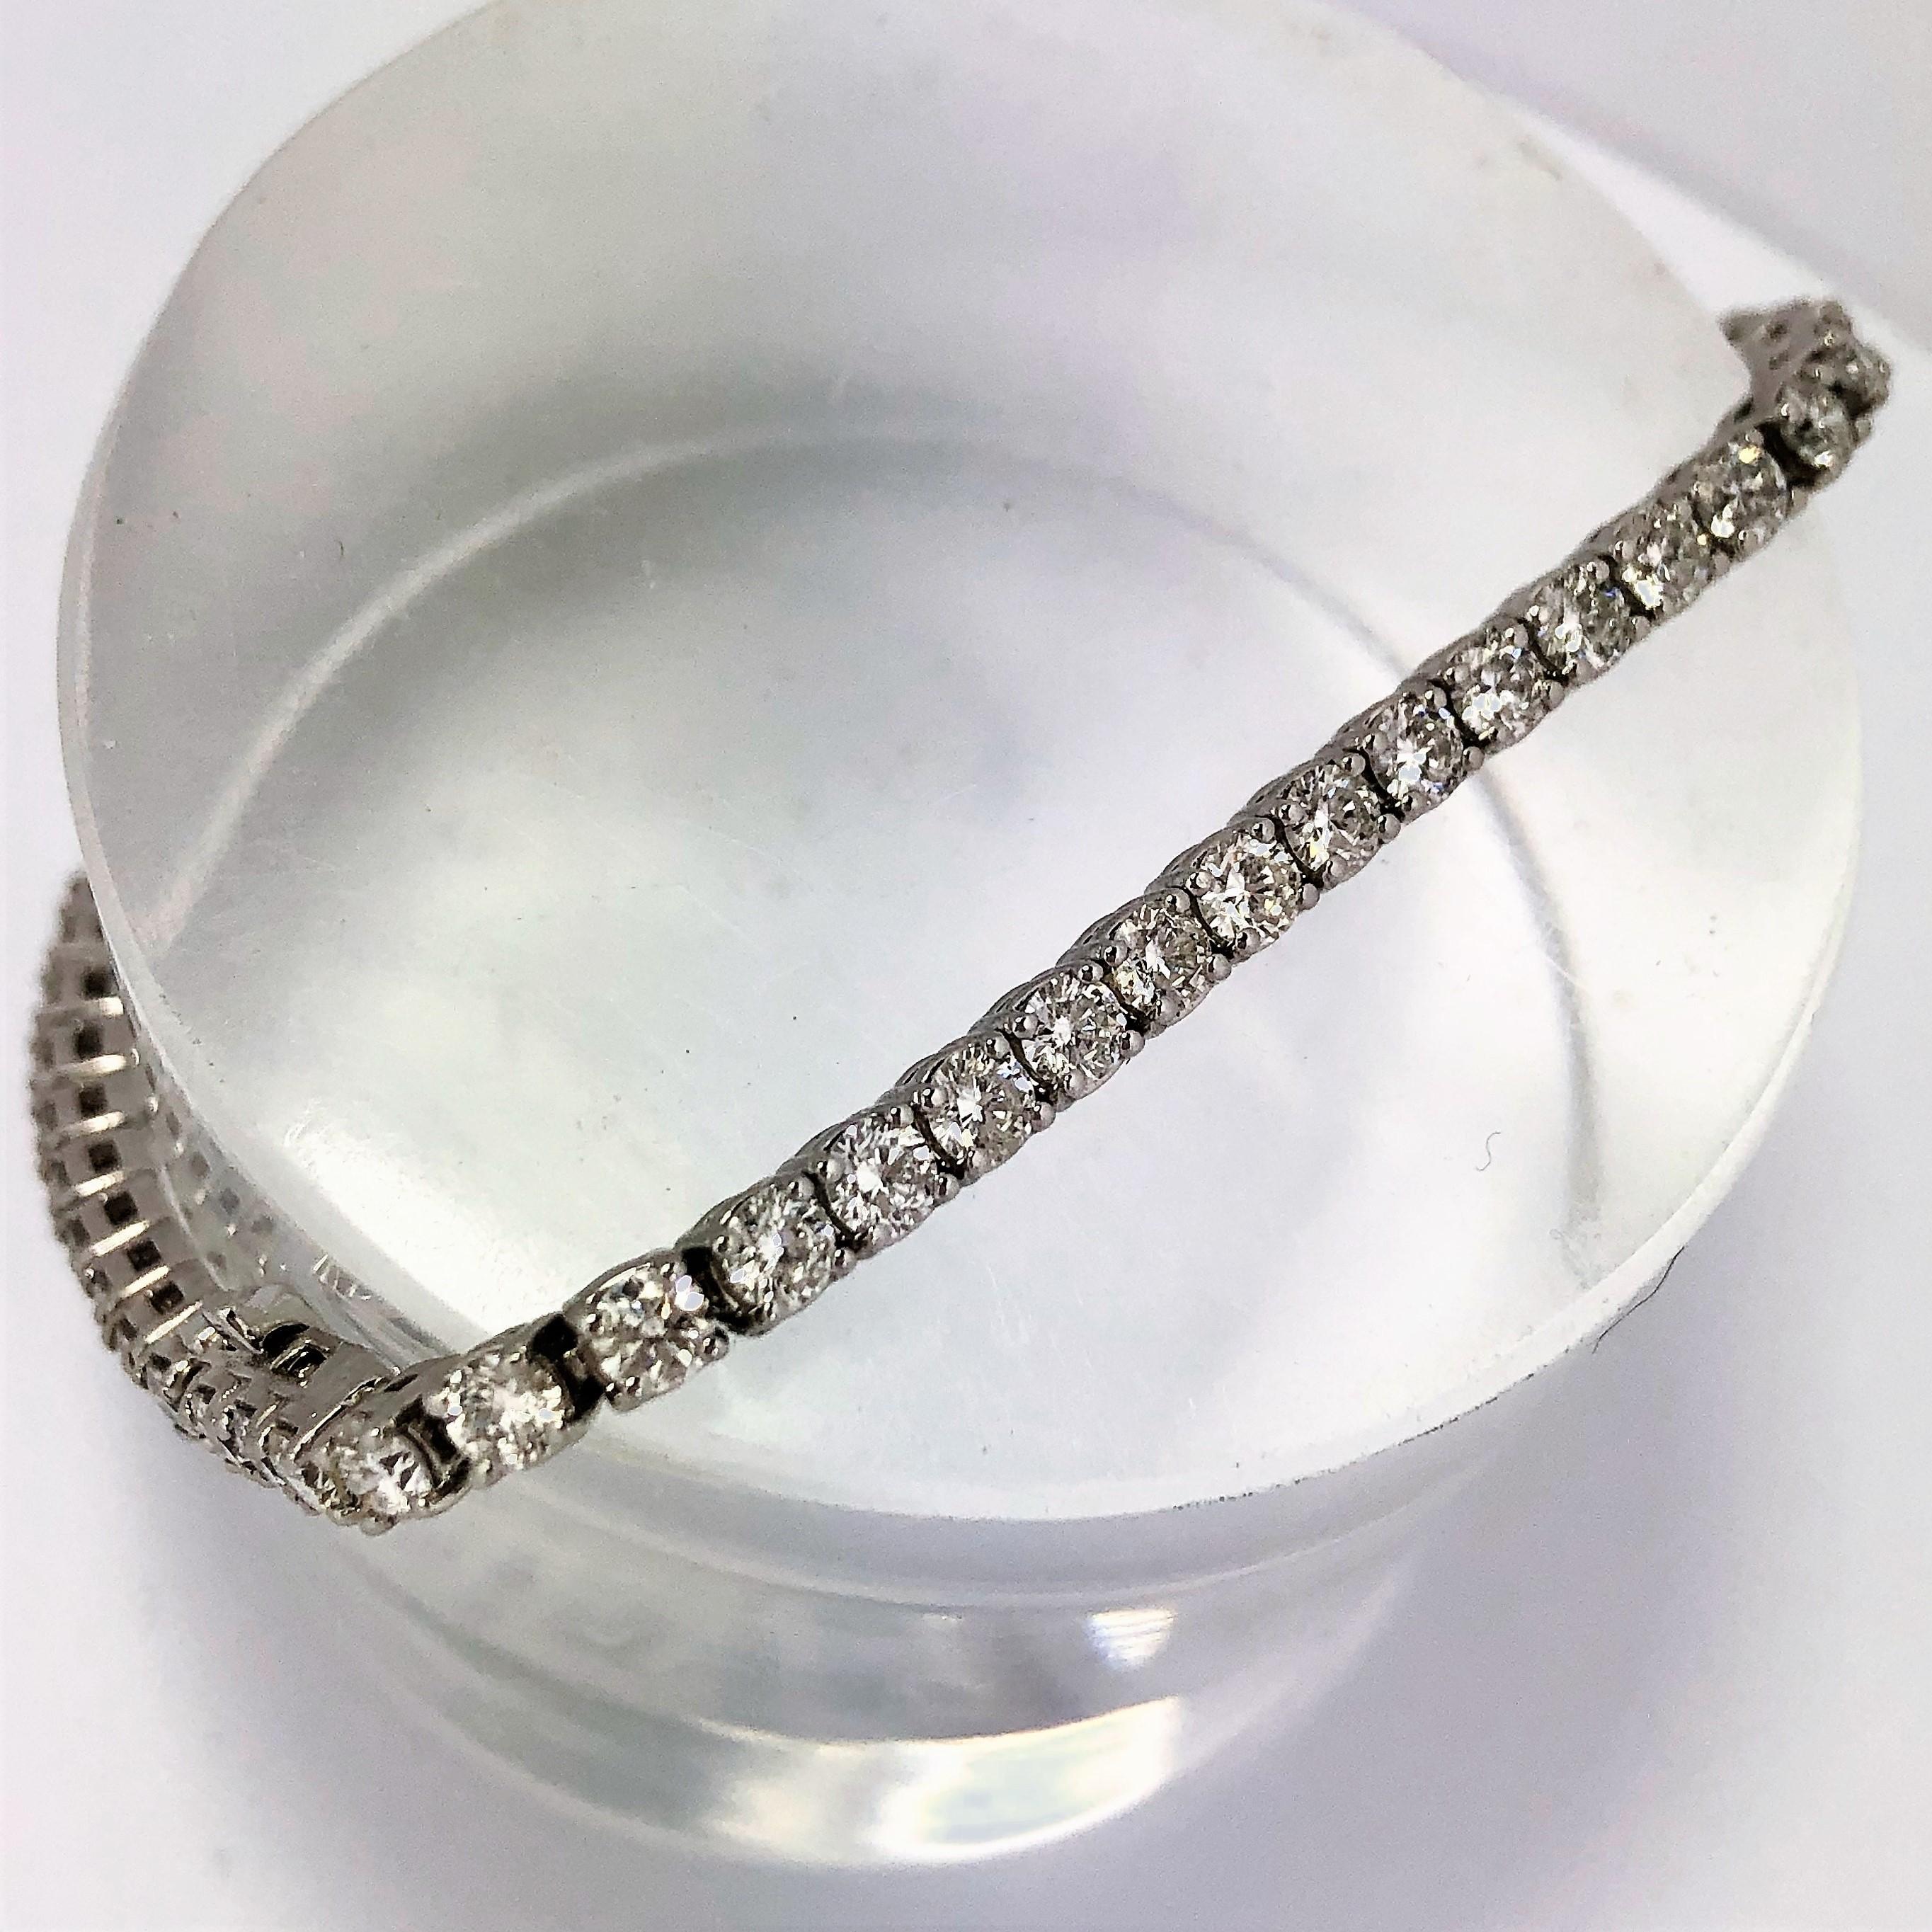 A traditional 18K White Gold Diamond Tennis Bracelet set with 55 round brilliant cut diamonds, set into 4 prong heads, weighing an approximate total of 5.44CT of overall G/H Color and VS1-VS2 Clarity. The beautifully matched, fine quality diamonds